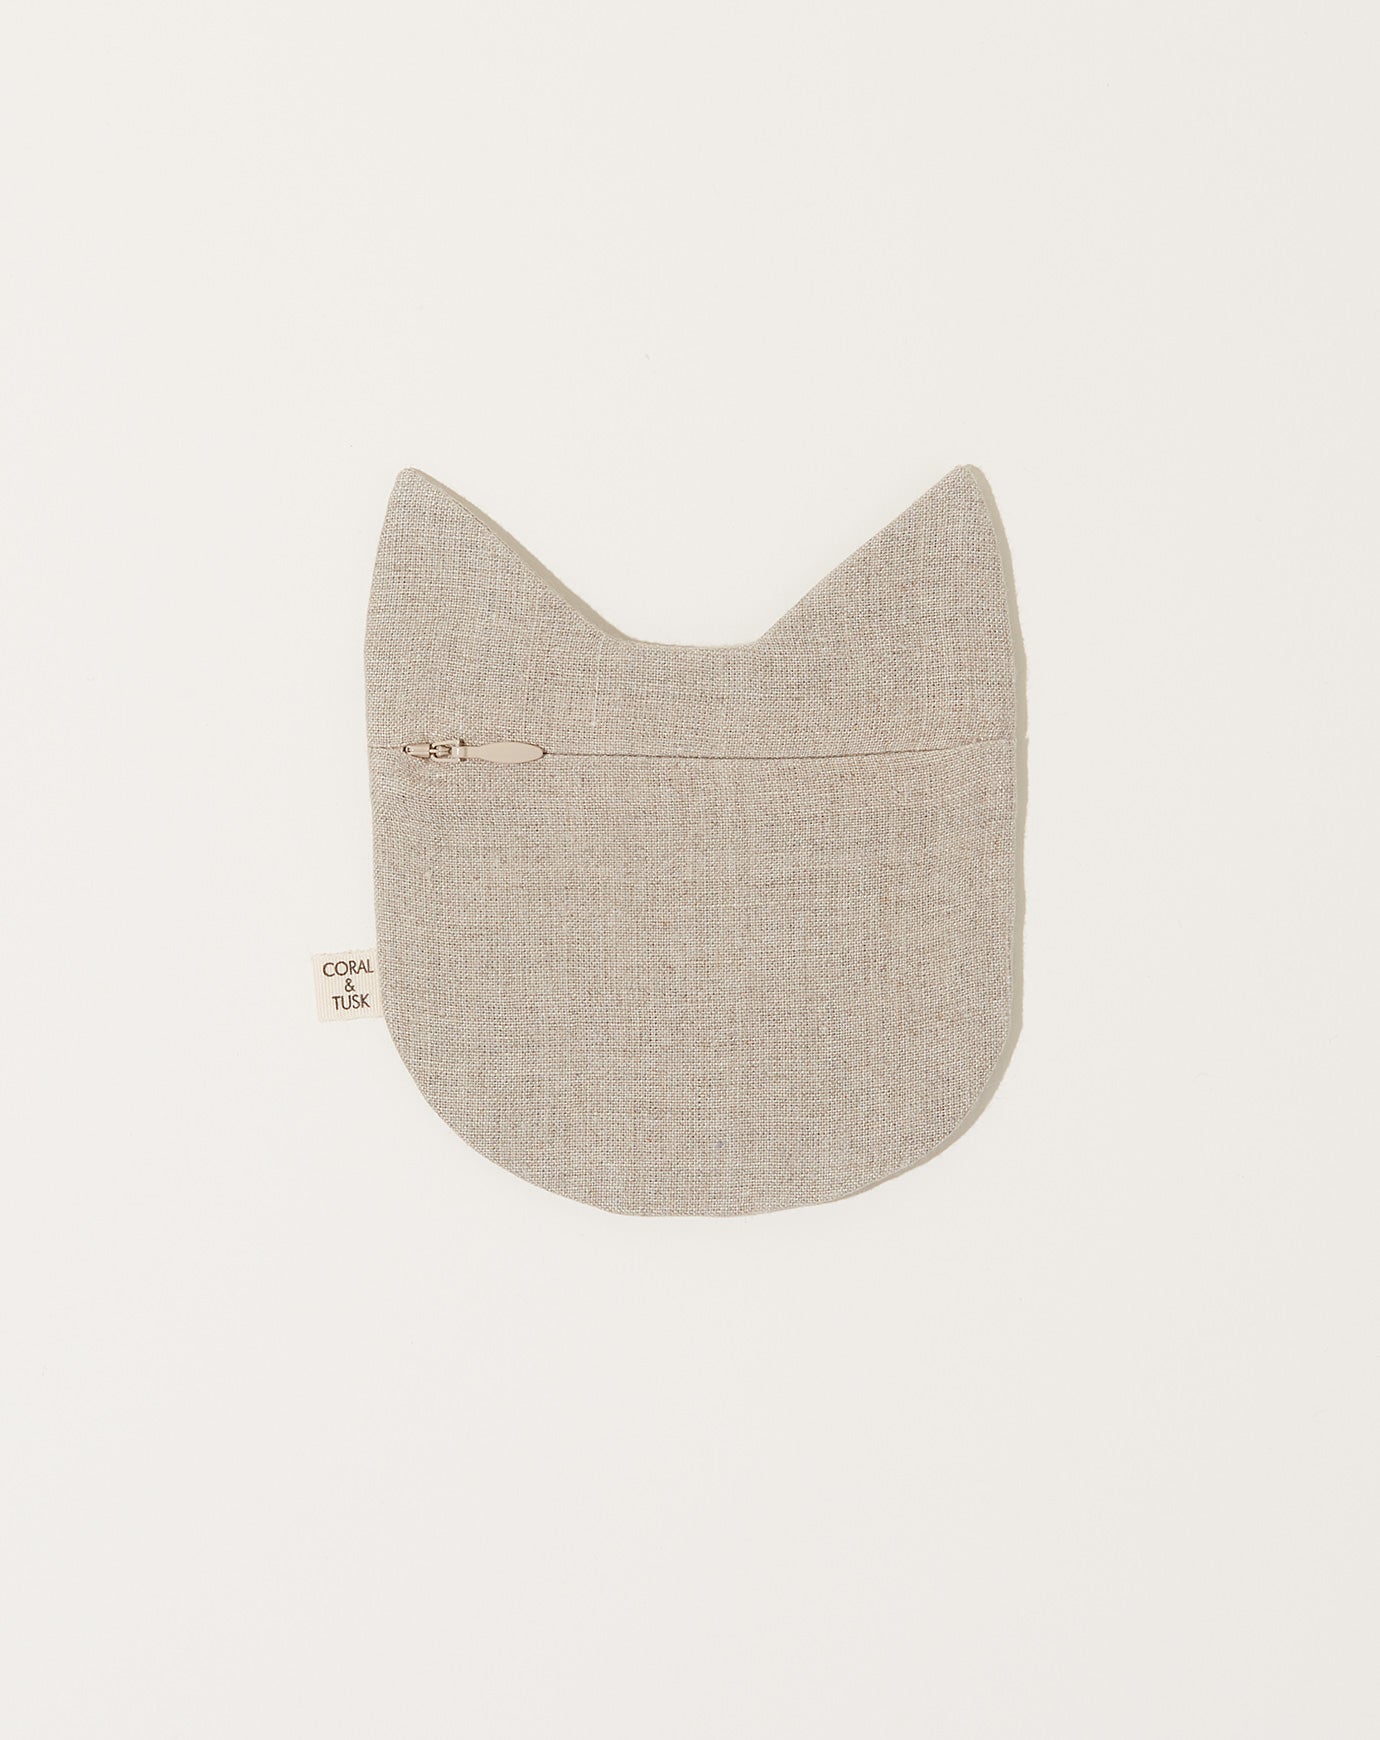 Coral & Tusk Coral & Tusk Black Cat Pouch